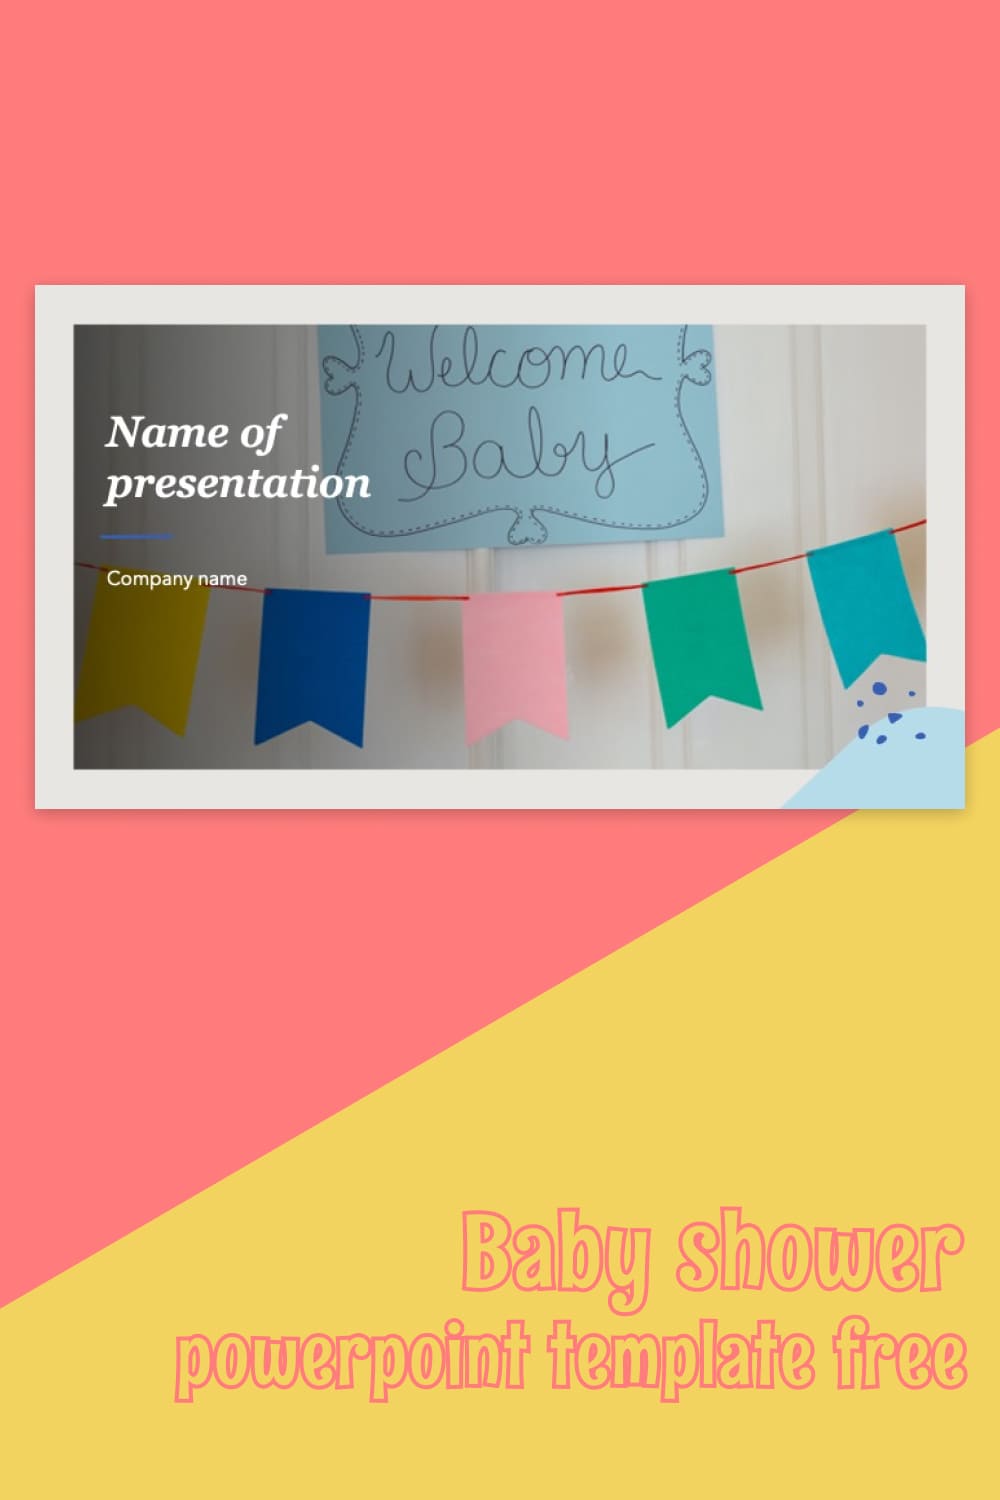 Pinterest of Baby Shower Powerpoint Template Free.